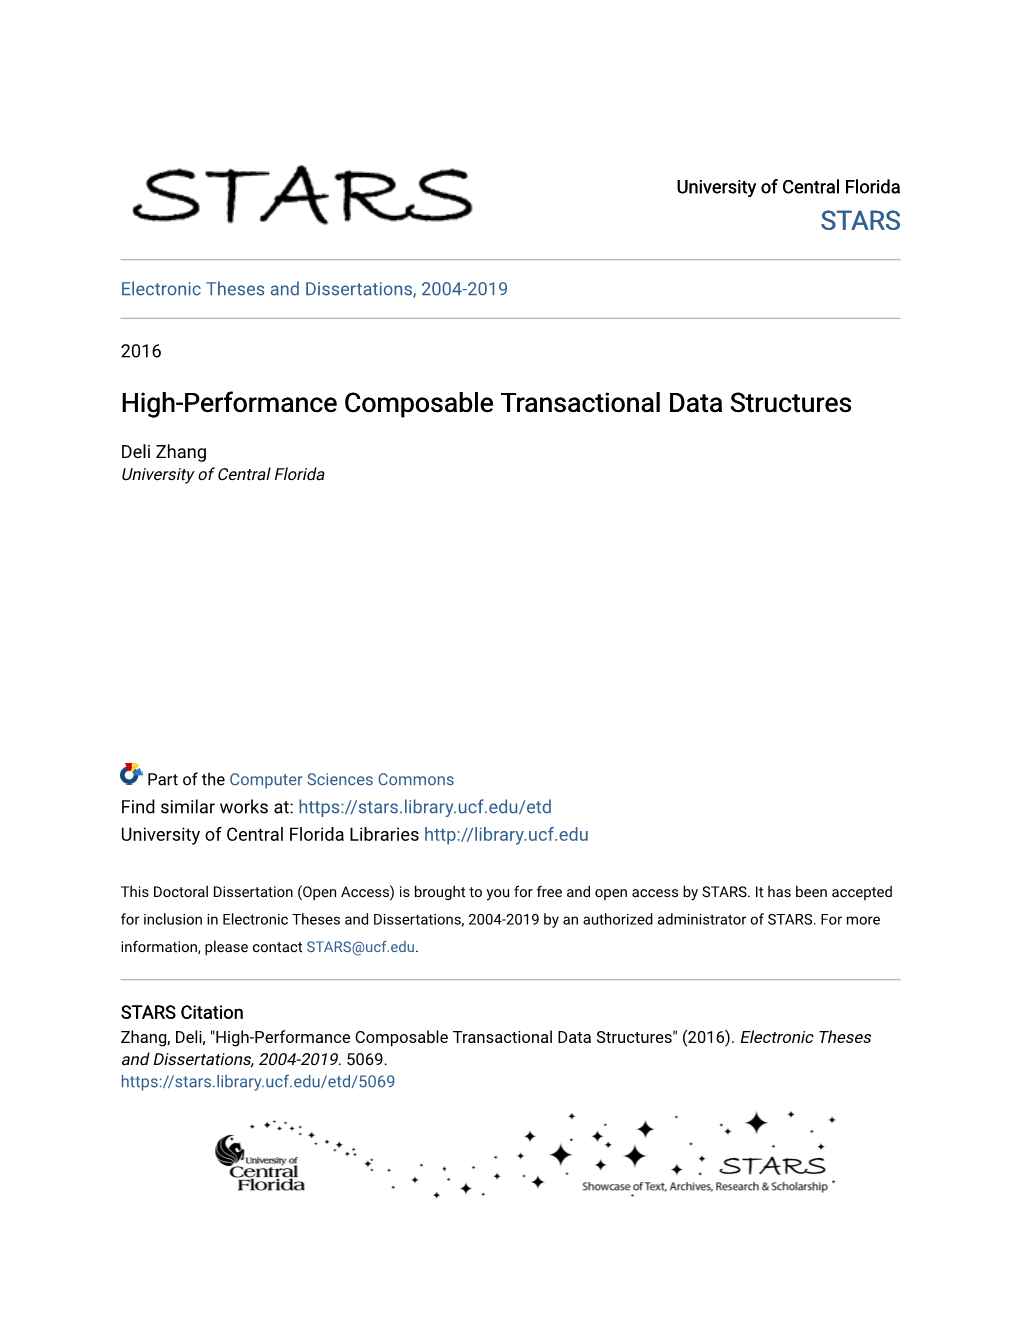 High-Performance Composable Transactional Data Structures